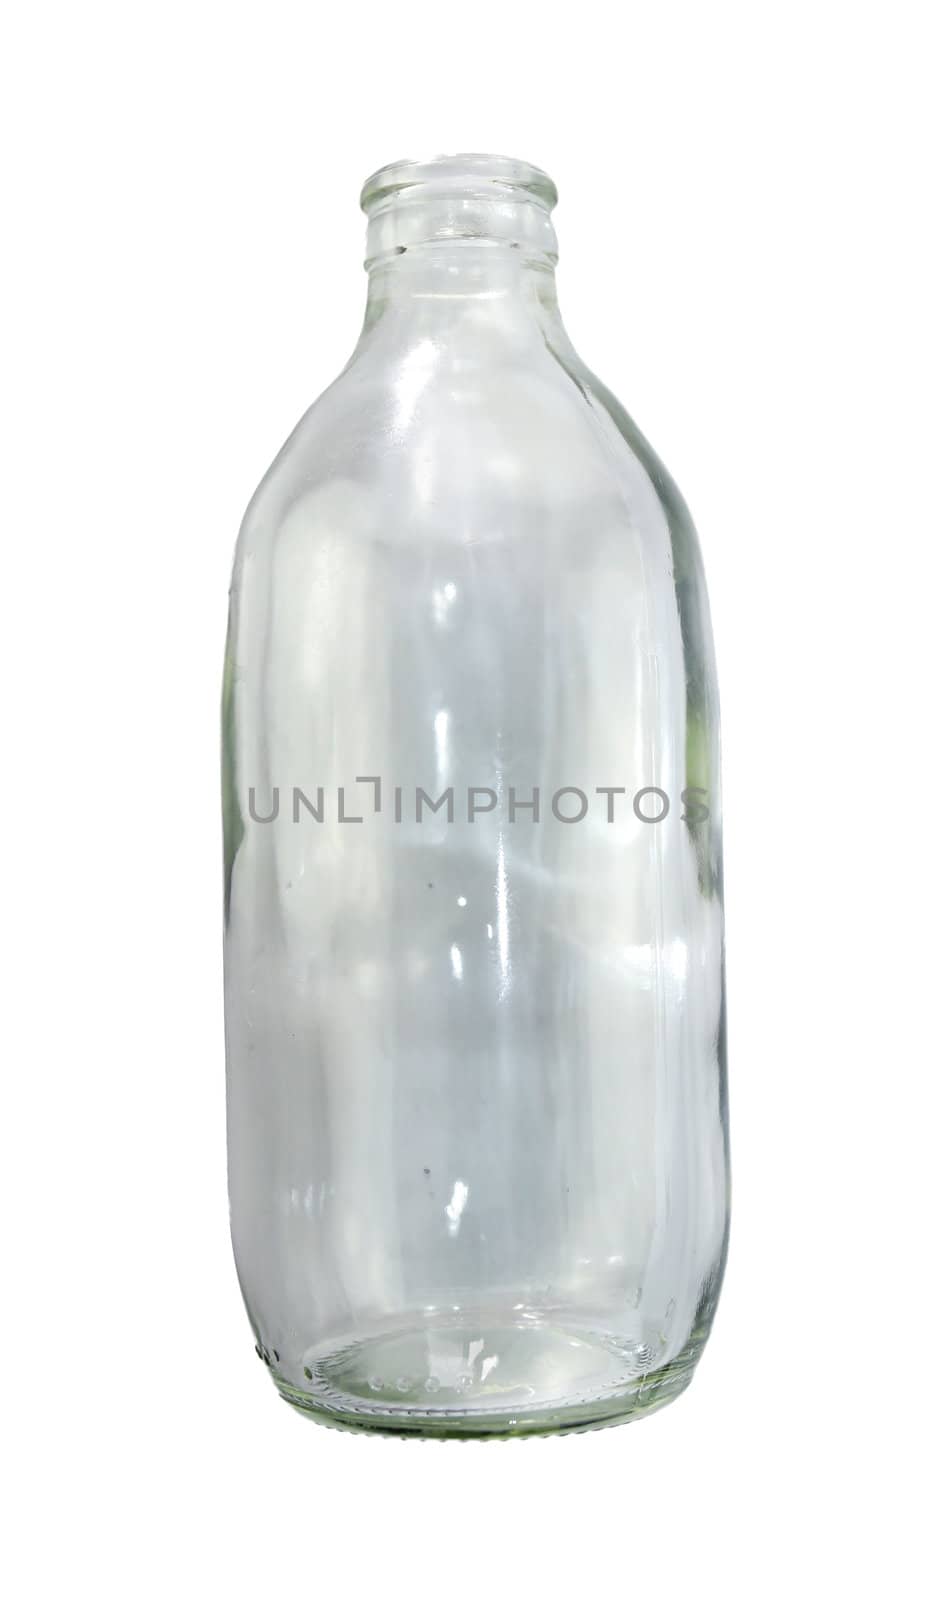 Glass bottle of soda water, isolated on white background.